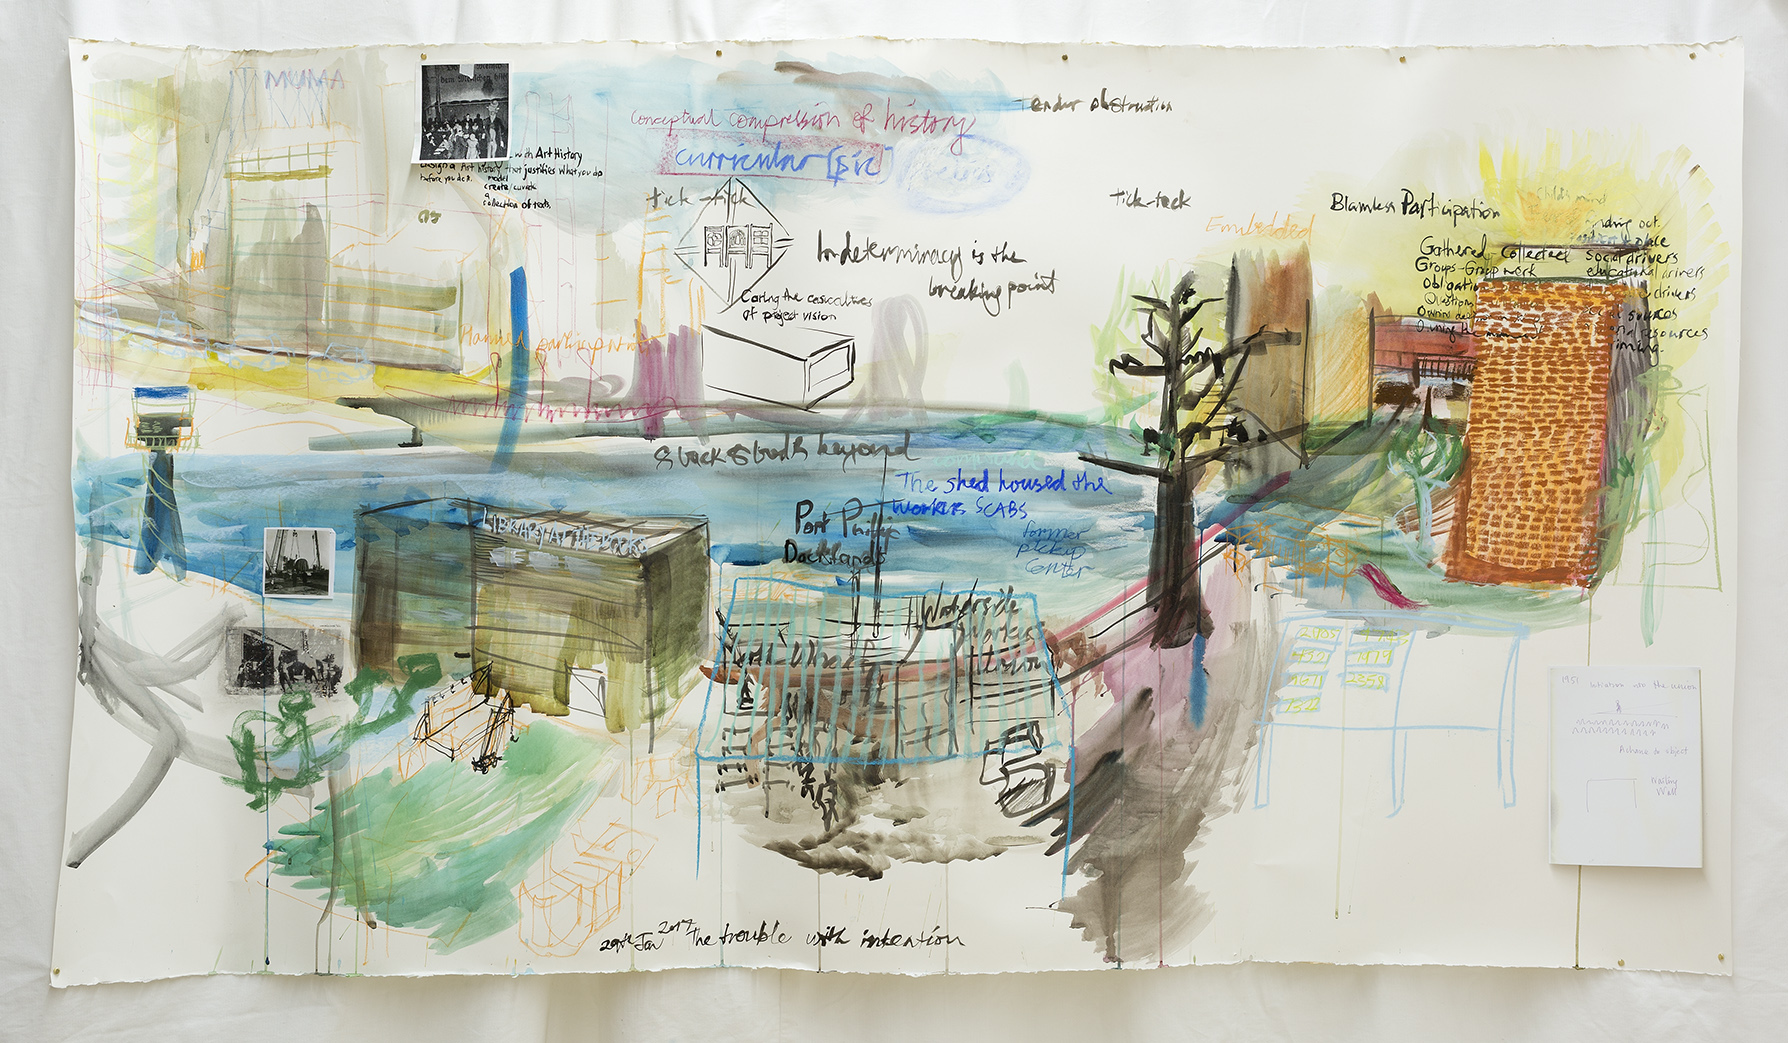  Kym Maxwell,  The three institutes in watercolour, Monash, The Library at the Docks, Collingwood College, 2016-2017, watercolour, conte, pastel, pen, collage photocopies, watercolour paper, tape.  Image: Christian Capurro 